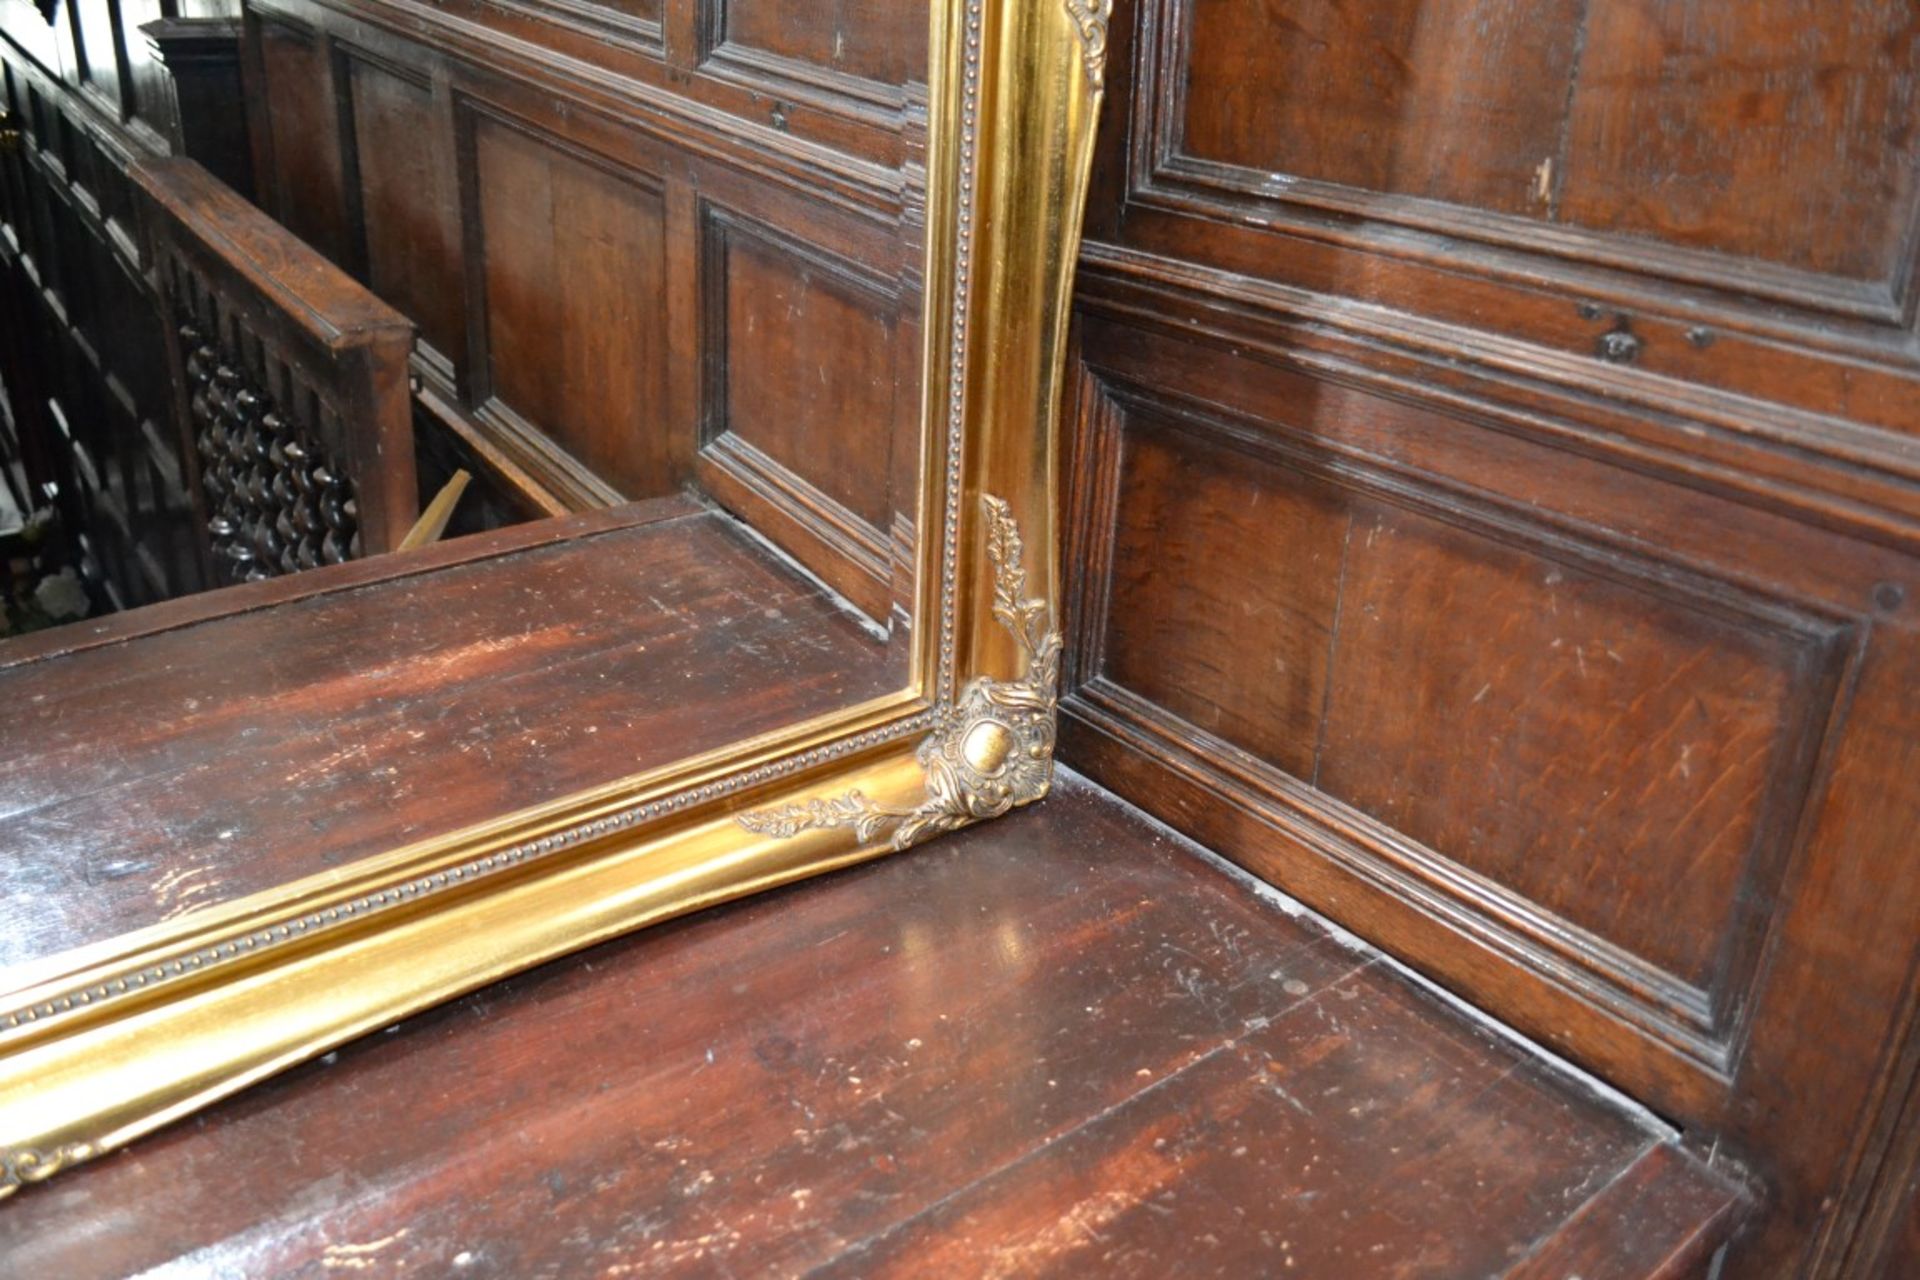 1 x Very Large Gilt Framed Mirror - From A Grade II Listed Hall In Great Condition - Dimensions: - Image 3 of 3